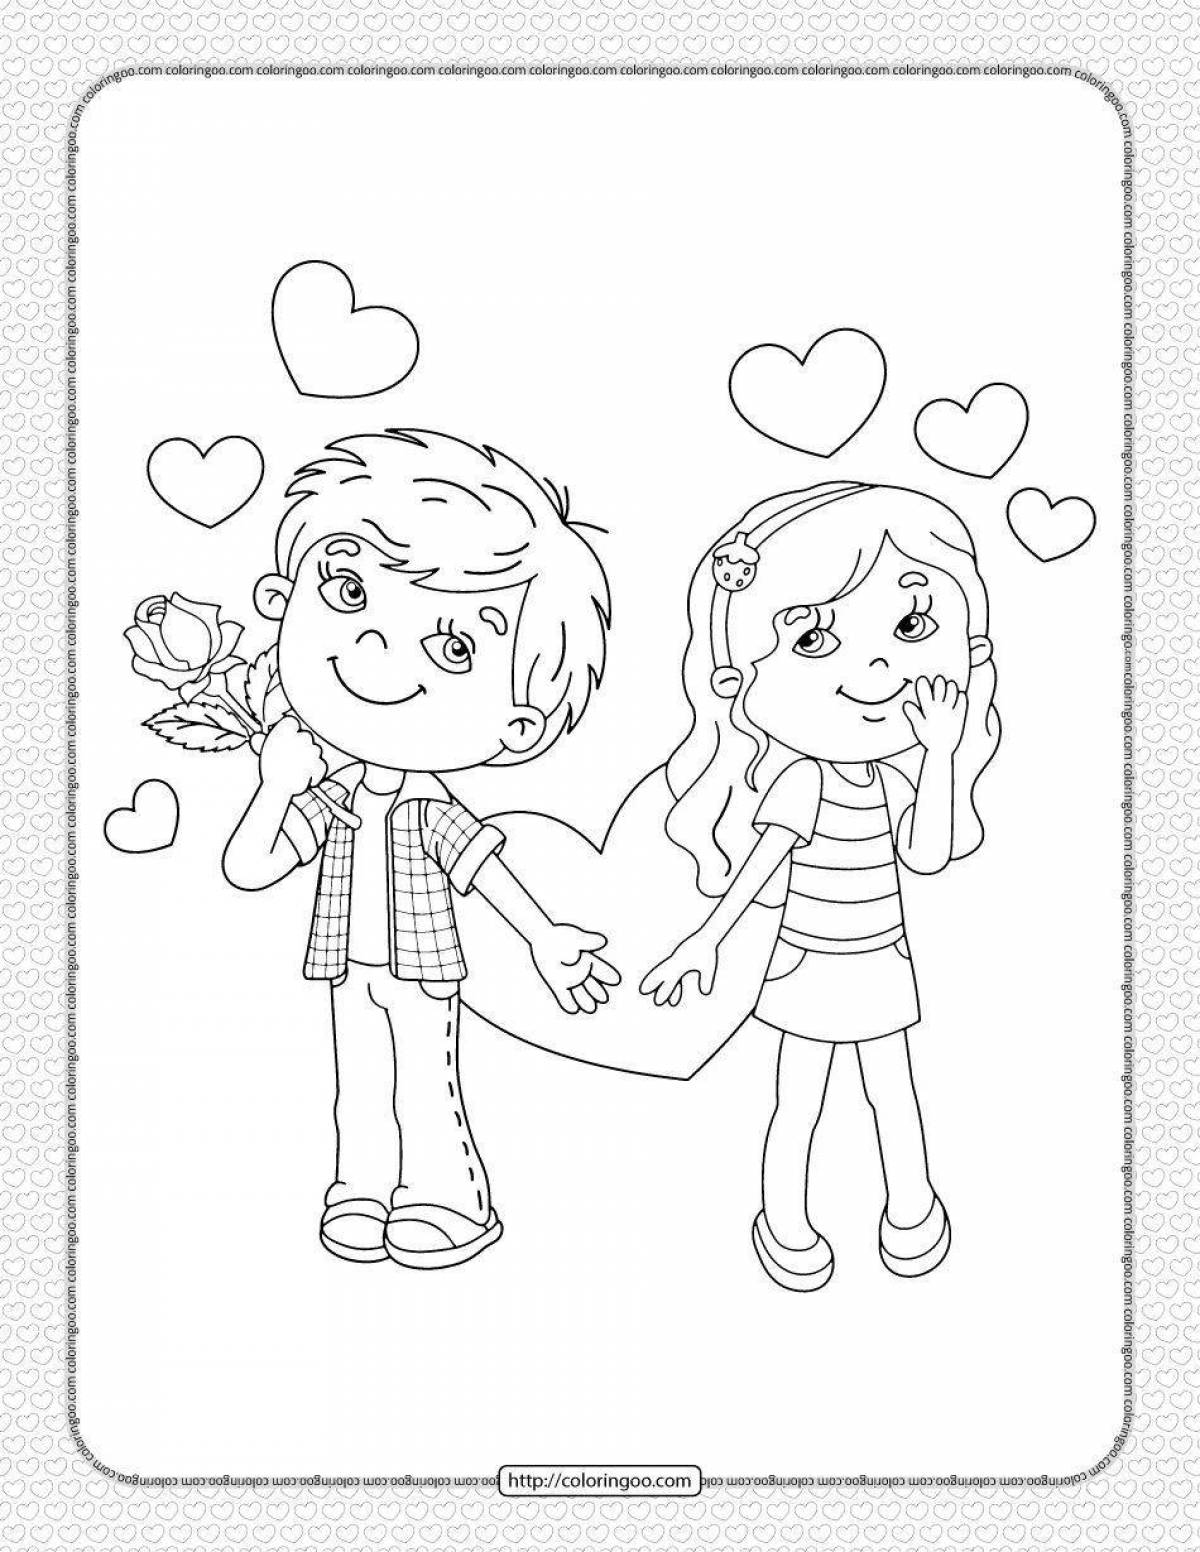 Coloring page adoring boy and girl holding hands